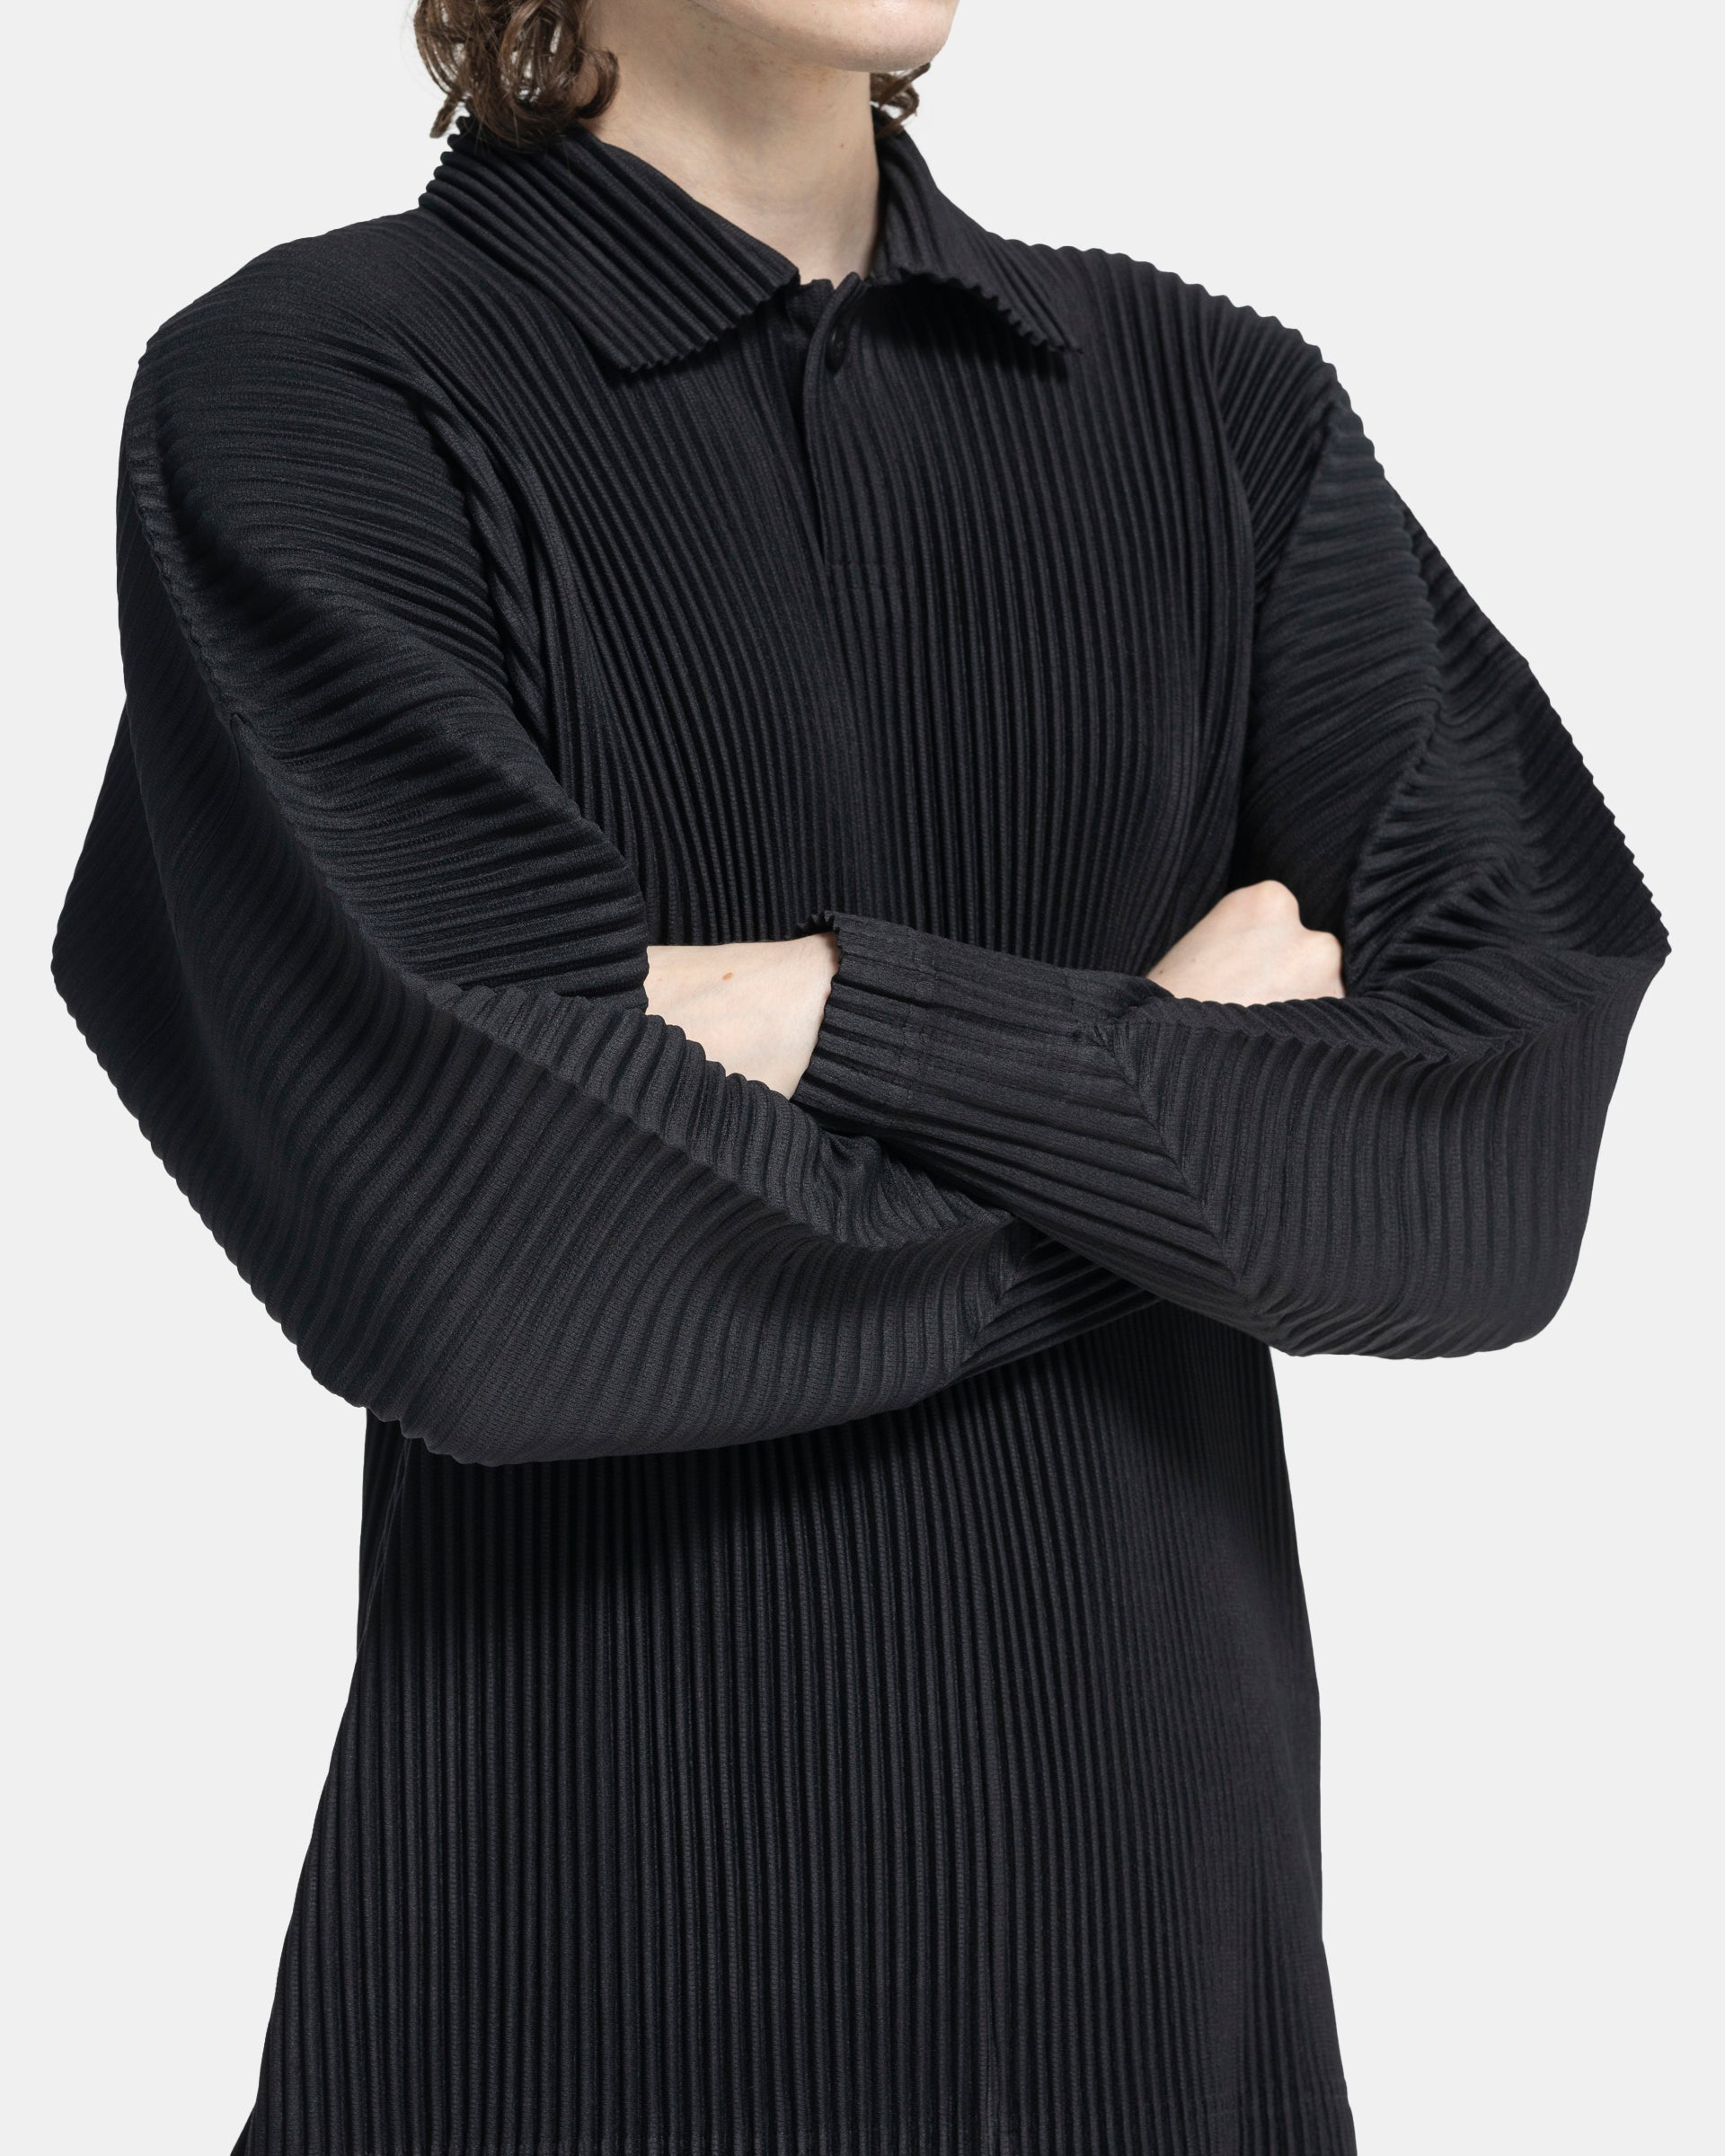 August Polo Shirt in Black